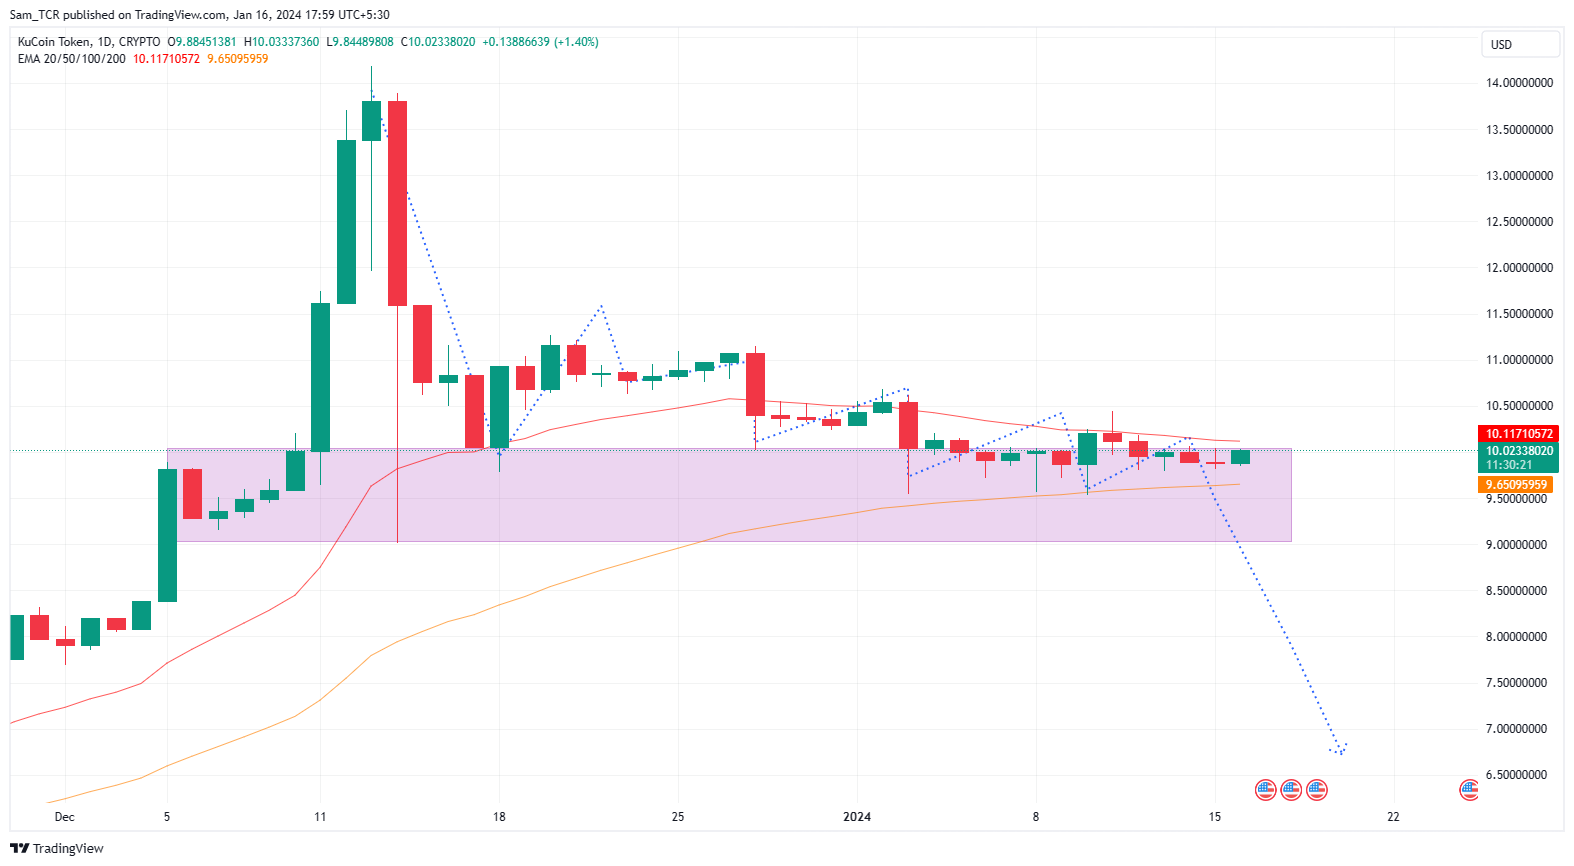 KuCoin Crypto: Can KCS Crypto Hold Its Current Level Or Fall?